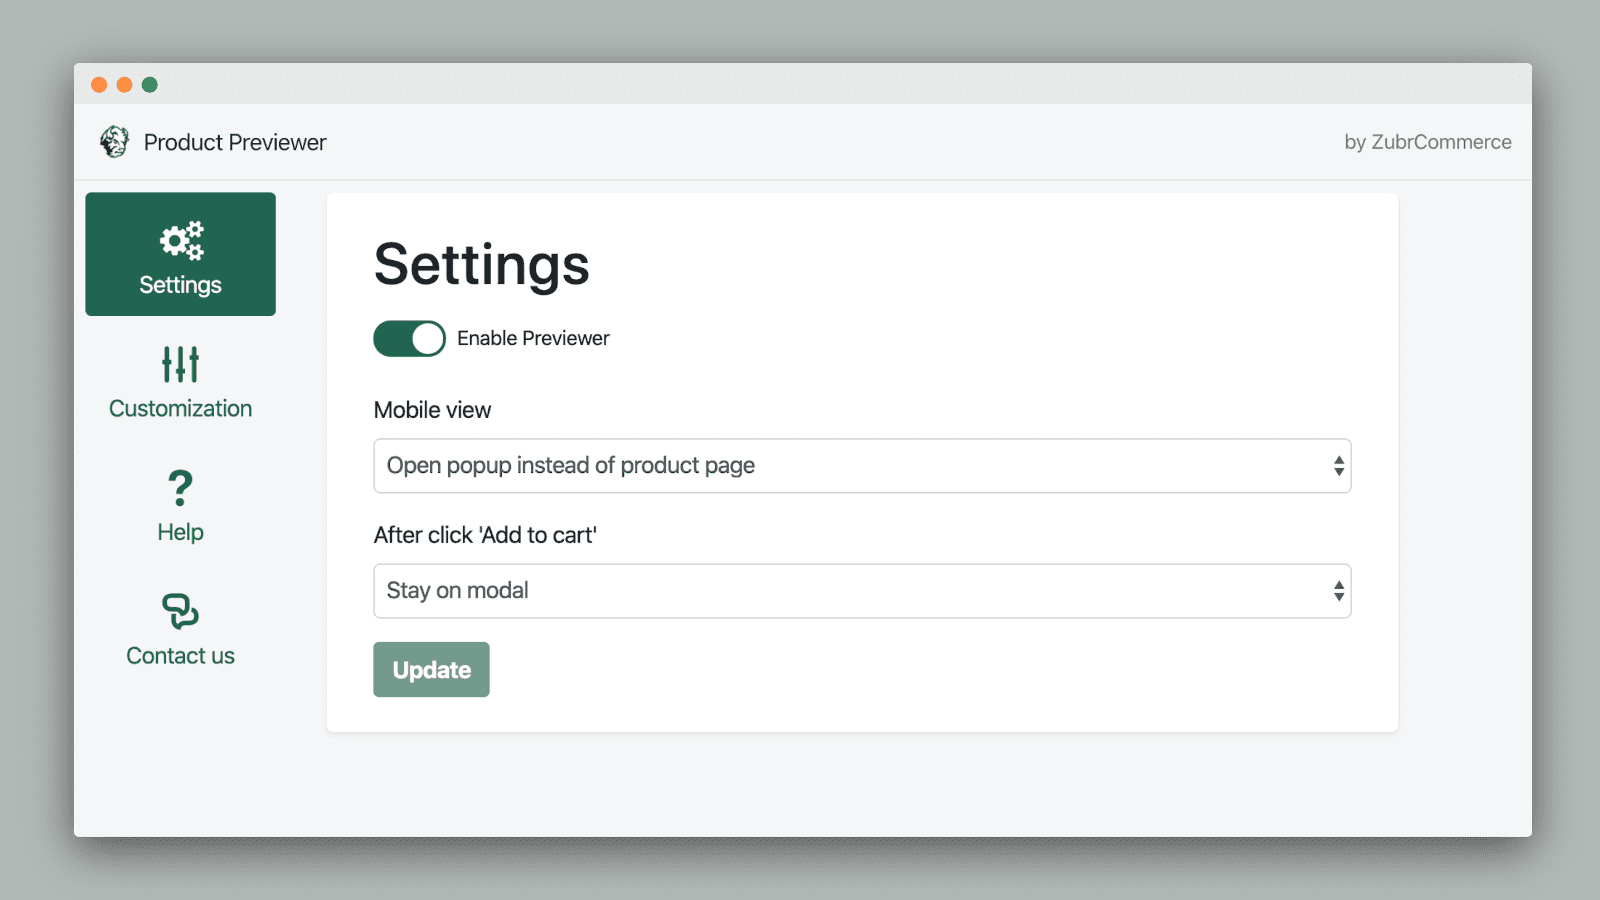 Product Previewer settings page